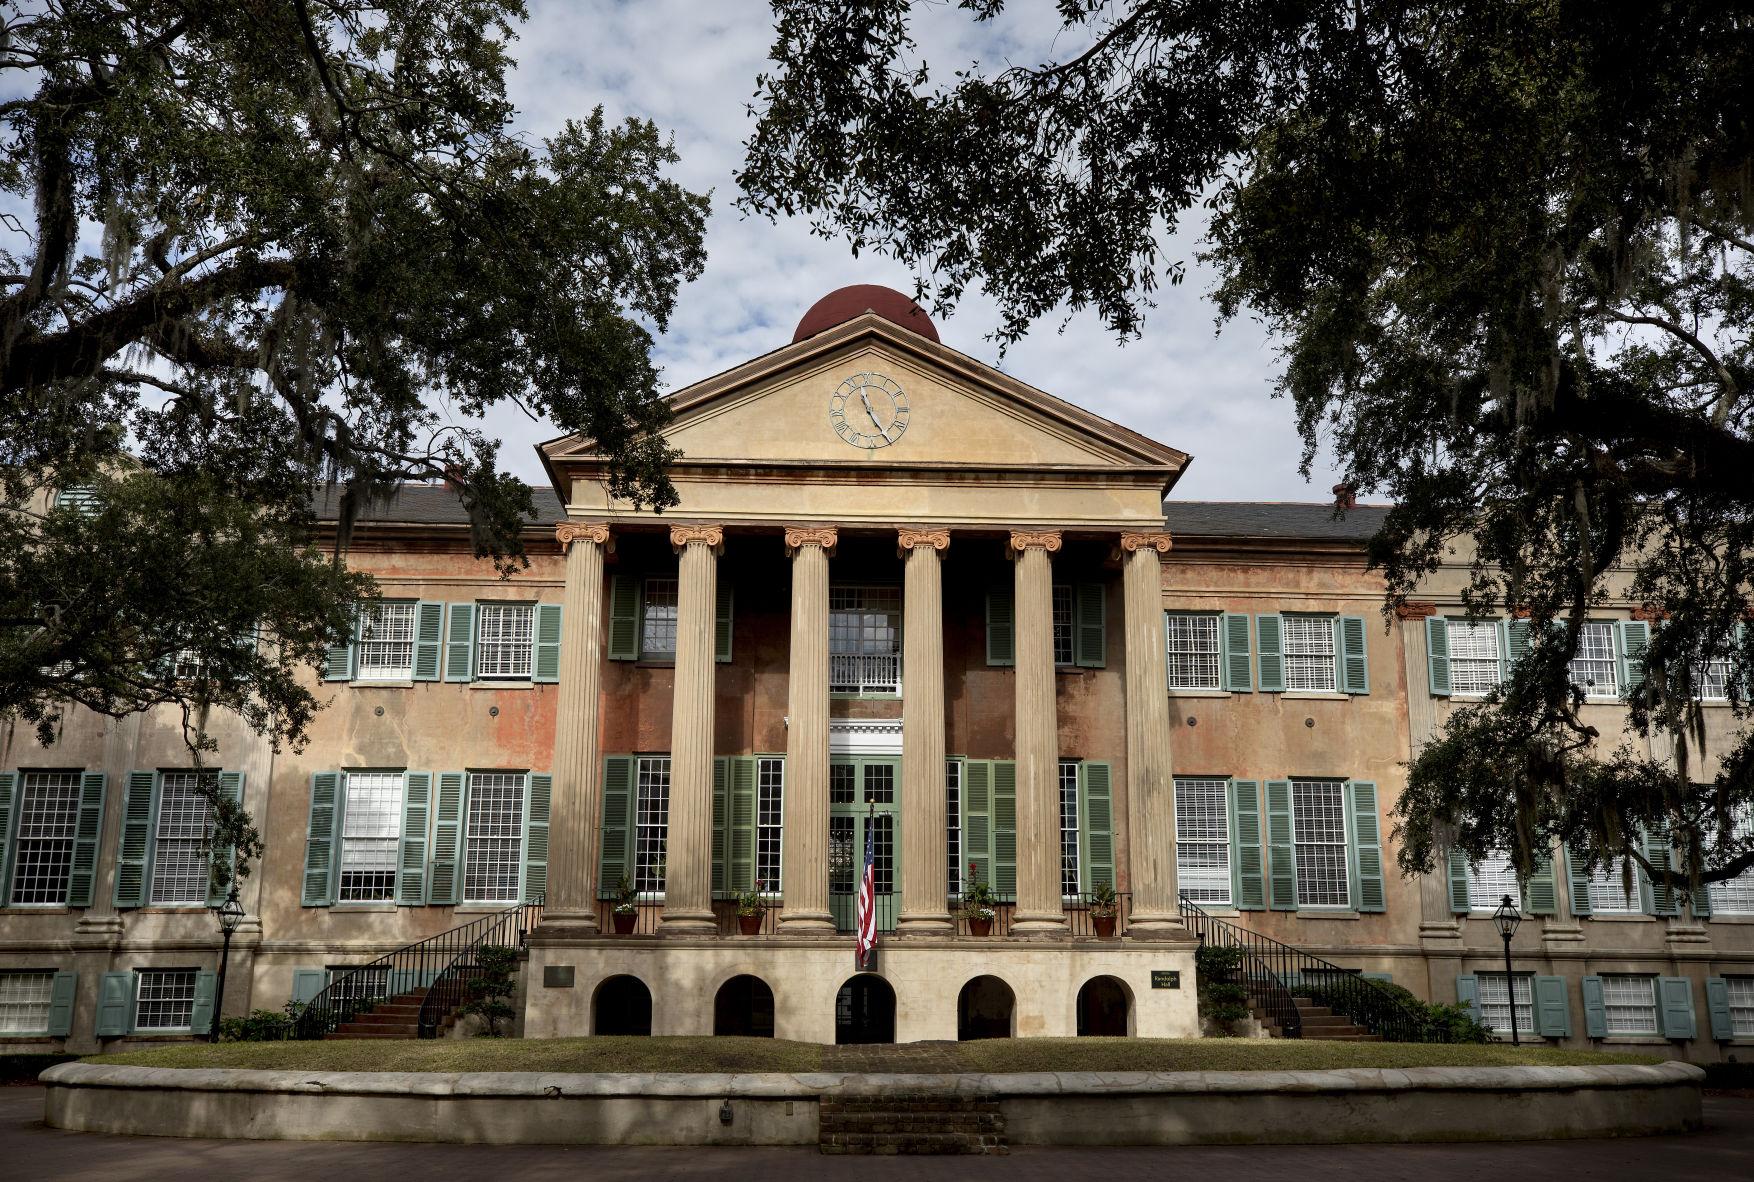 College of Charleston founded 250 years ago as one of the oldest